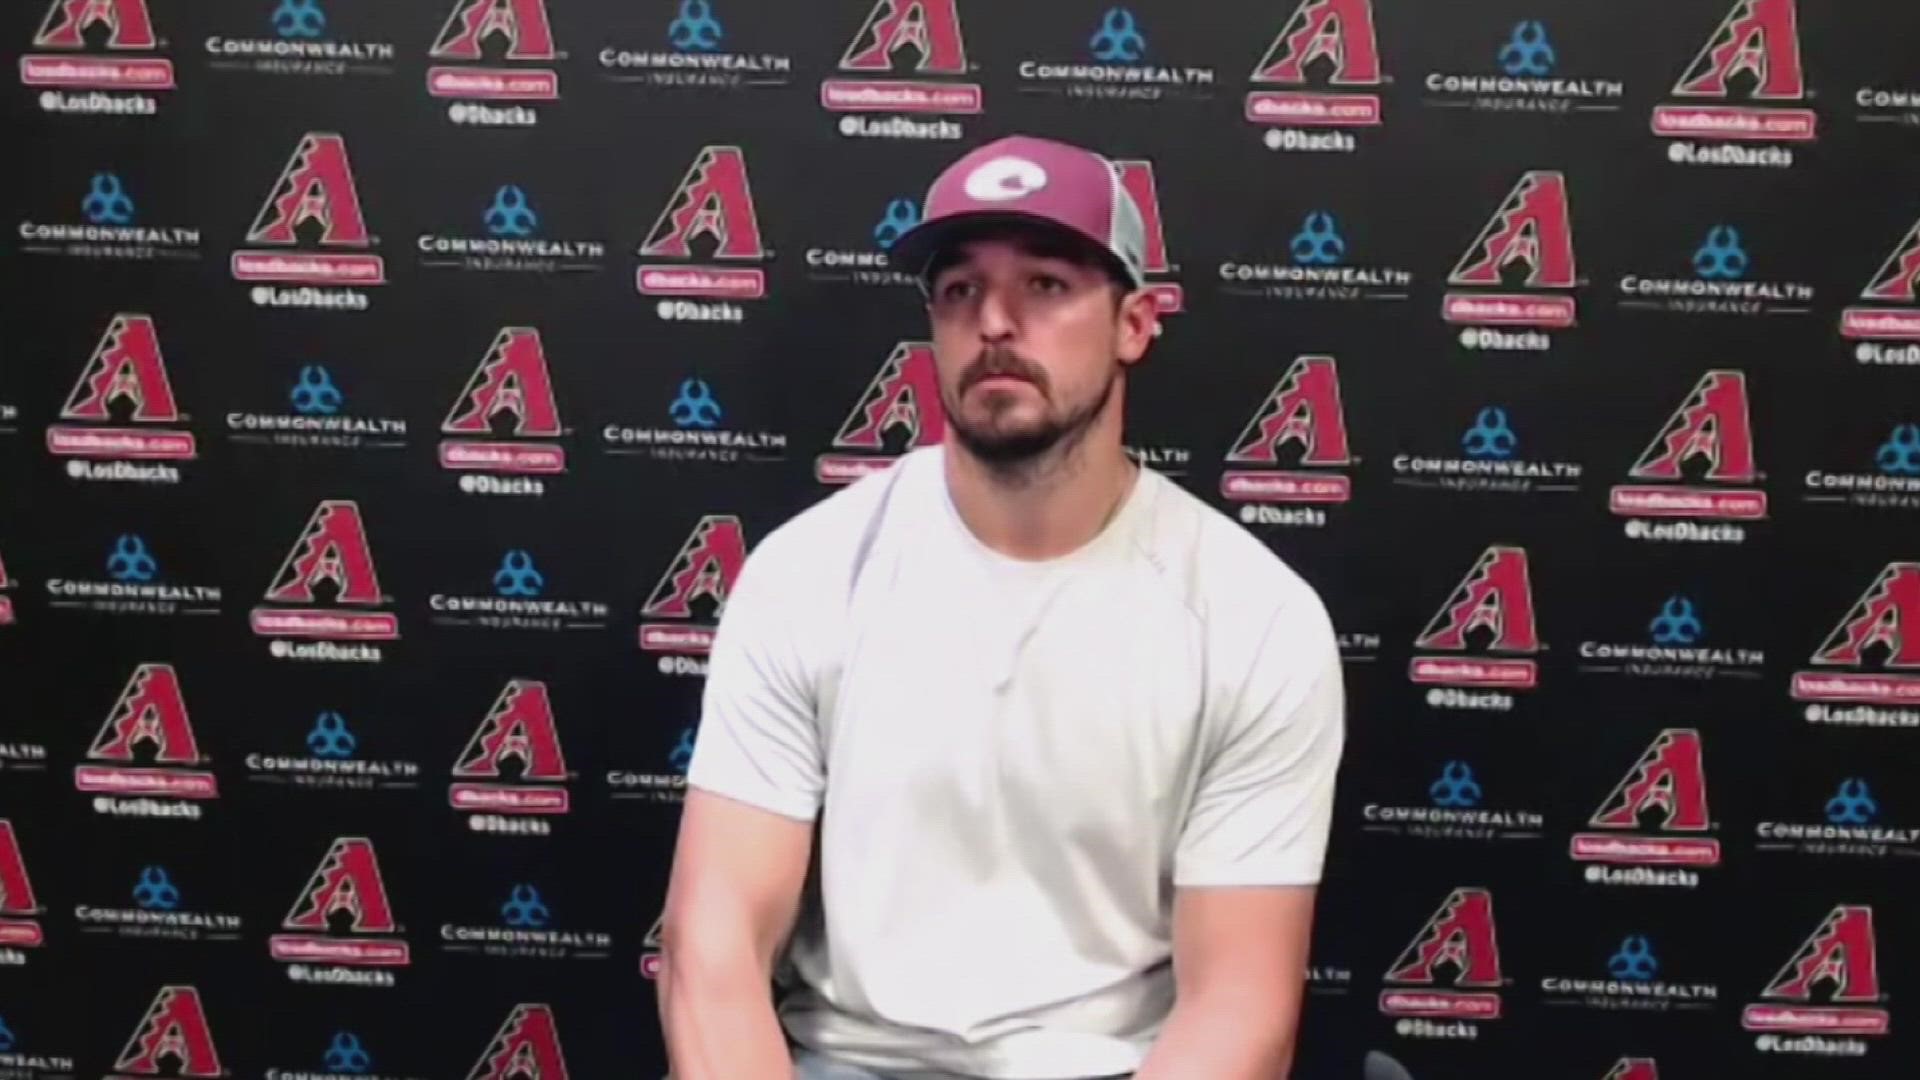 After Diamondbacks pitcher Caleb Smith was ejected for allegedly using a foreign substance, he and manager Torey Lovullo speak about it and his possible suspension.